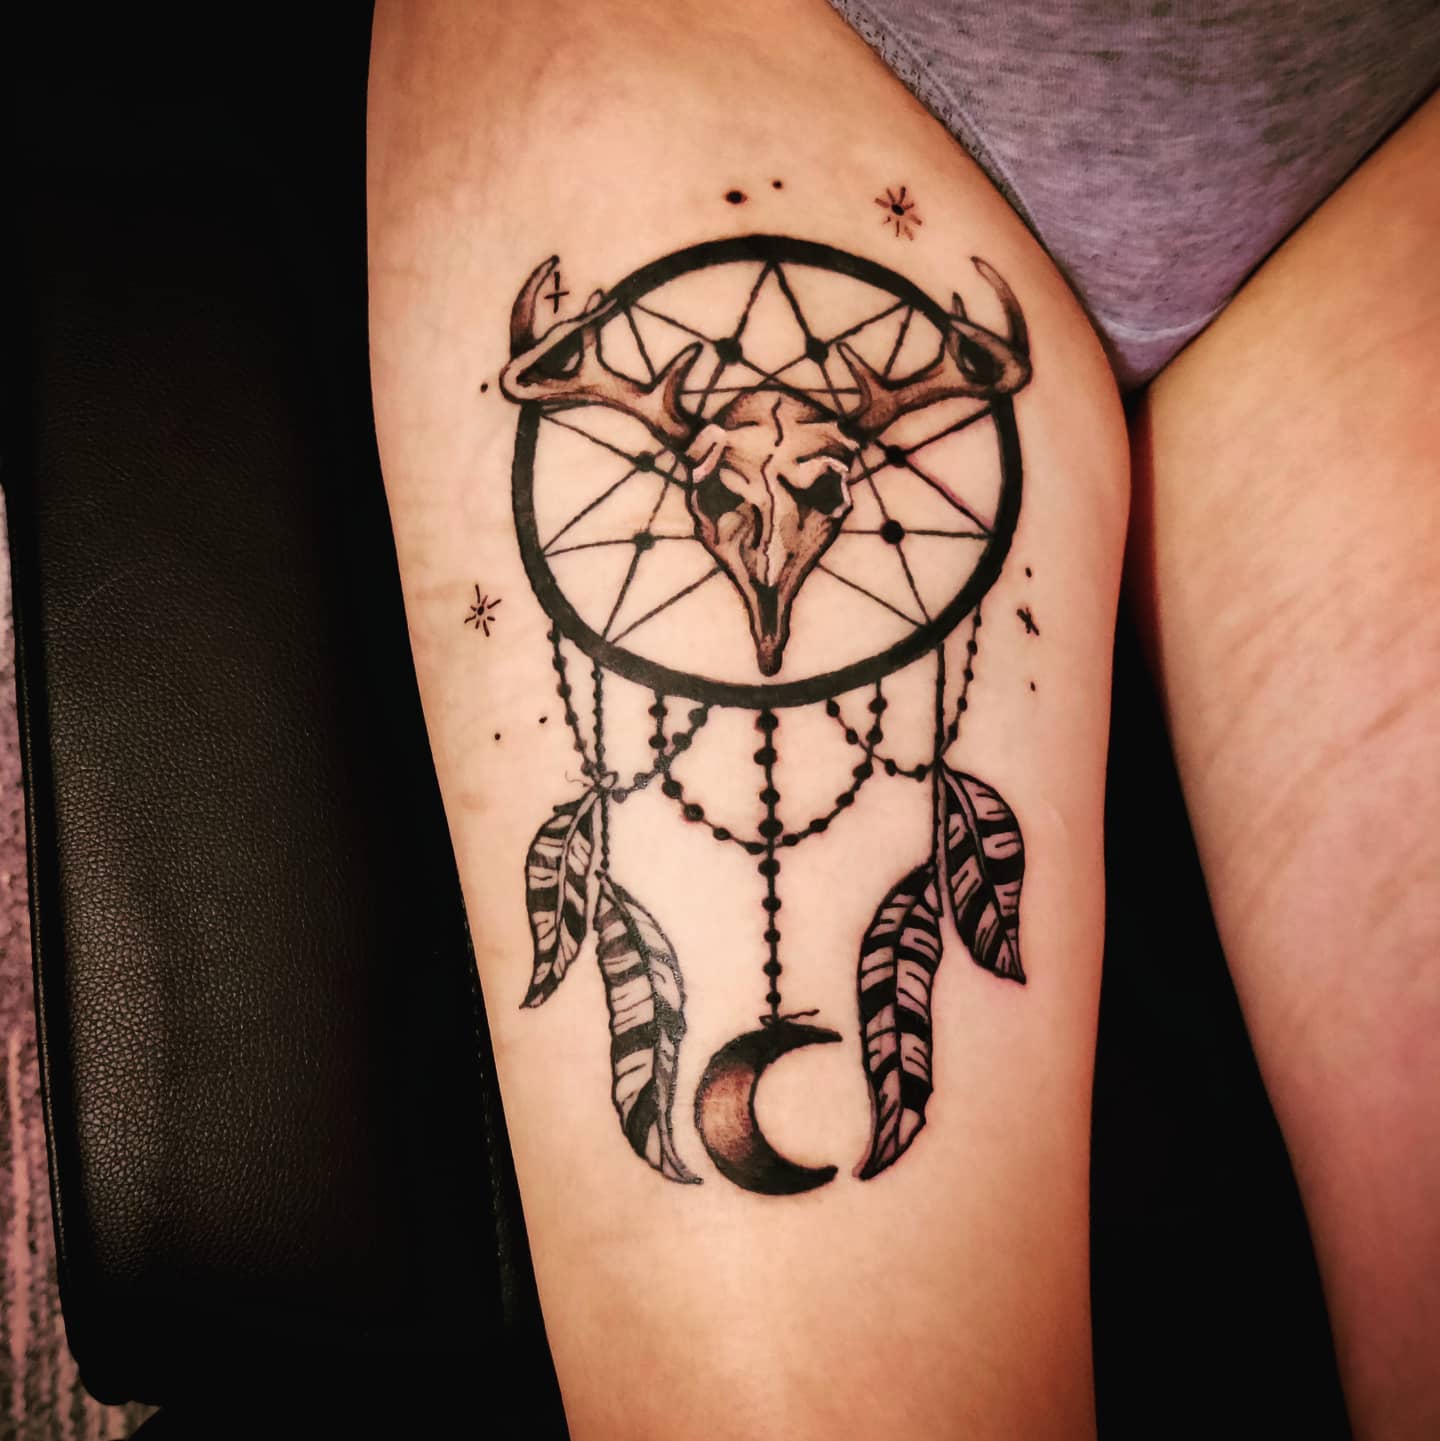 A dream catcher tattoo with a deer skull is a symbol of luck and good fortune. It is believed that the deer represents abundance, fertility, and good health. A dream catcher tattoo with a deer skull can help you have all three of those things in your life.